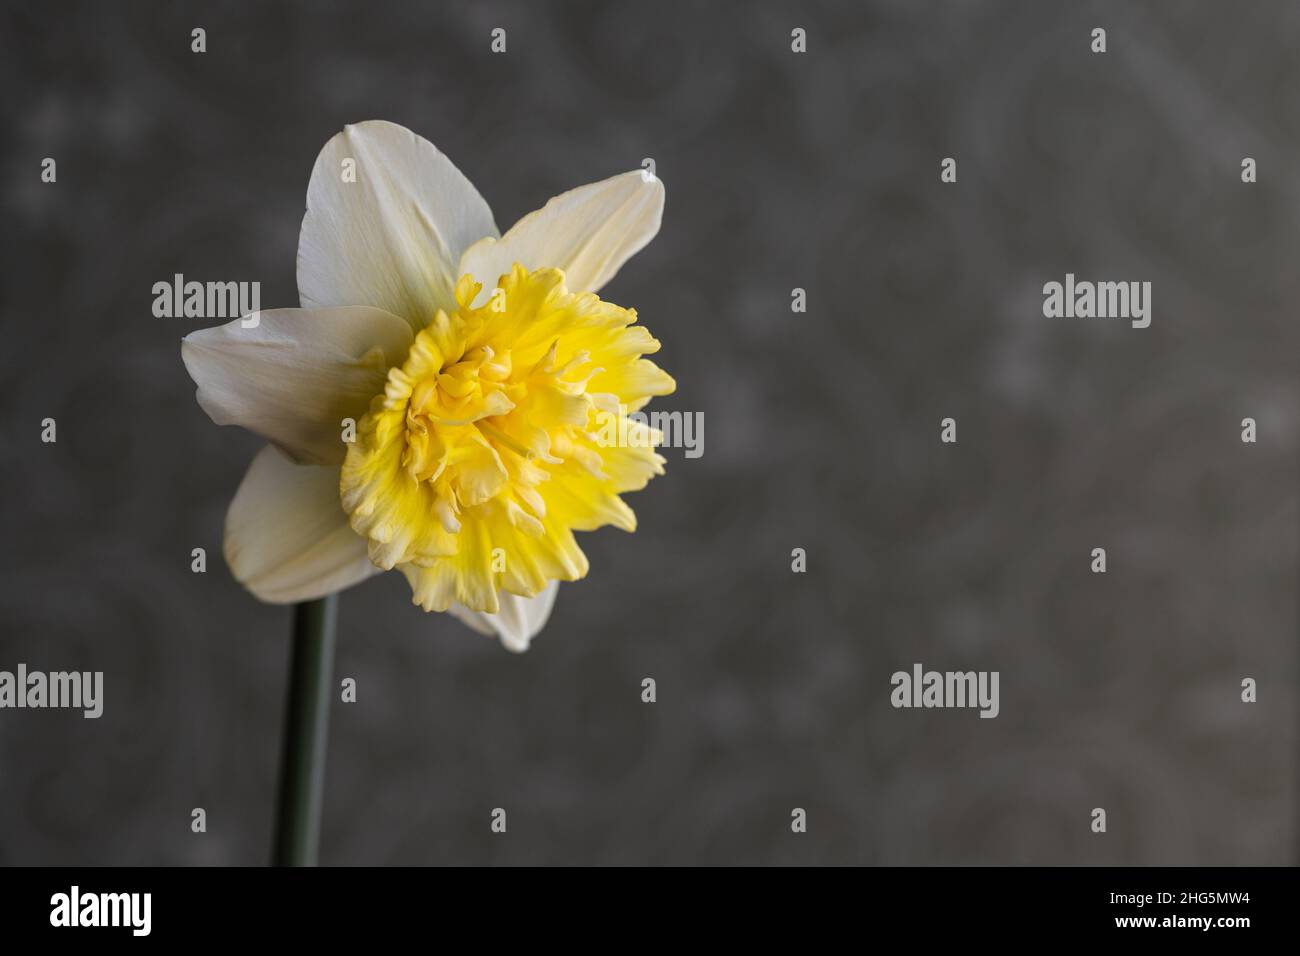 One Single Bright Yellow Daffodil on Textured Gray Background Stock Photo